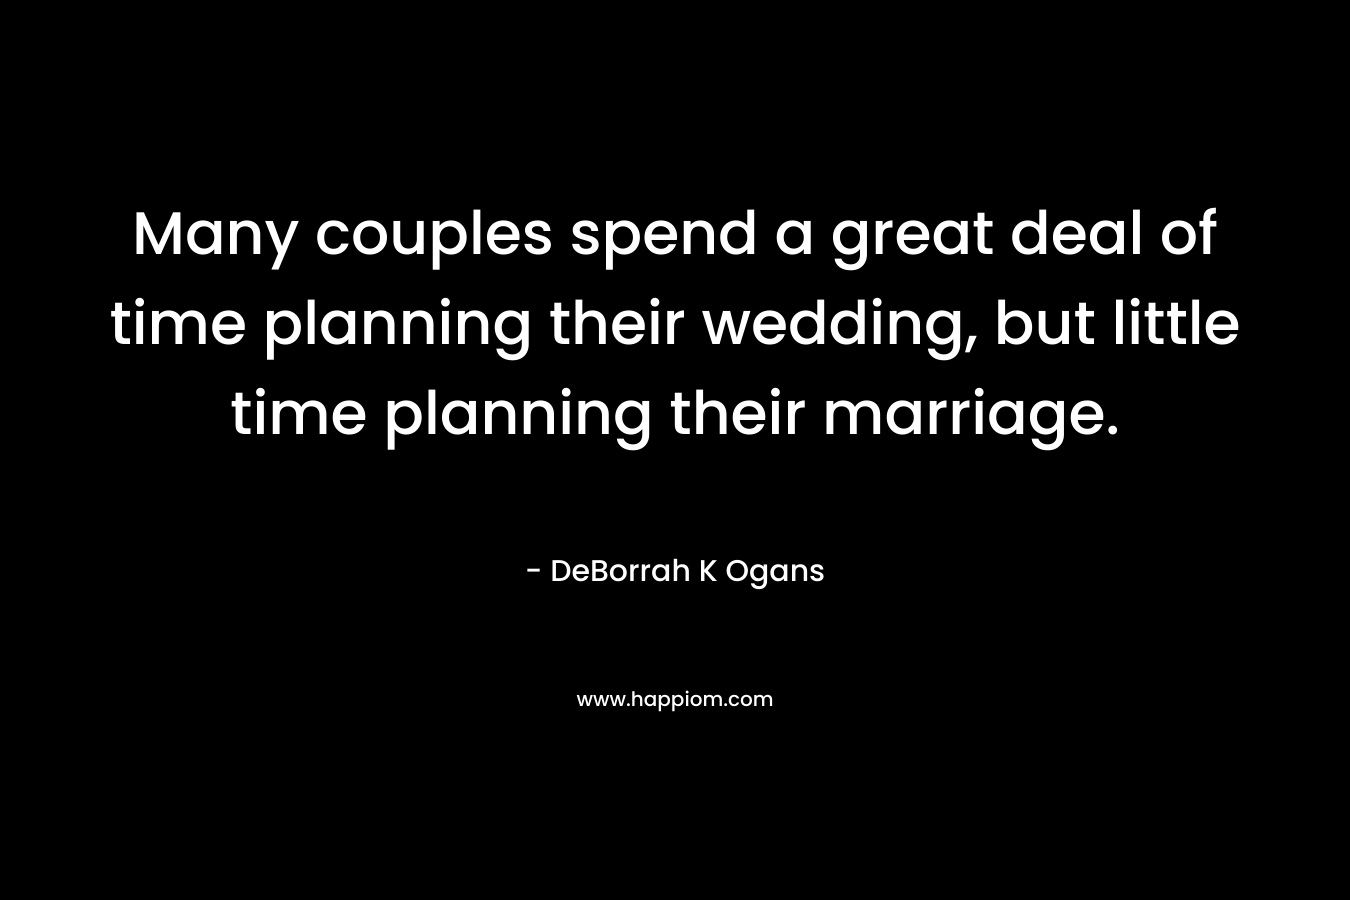 Many couples spend a great deal of time planning their wedding, but little time planning their marriage.